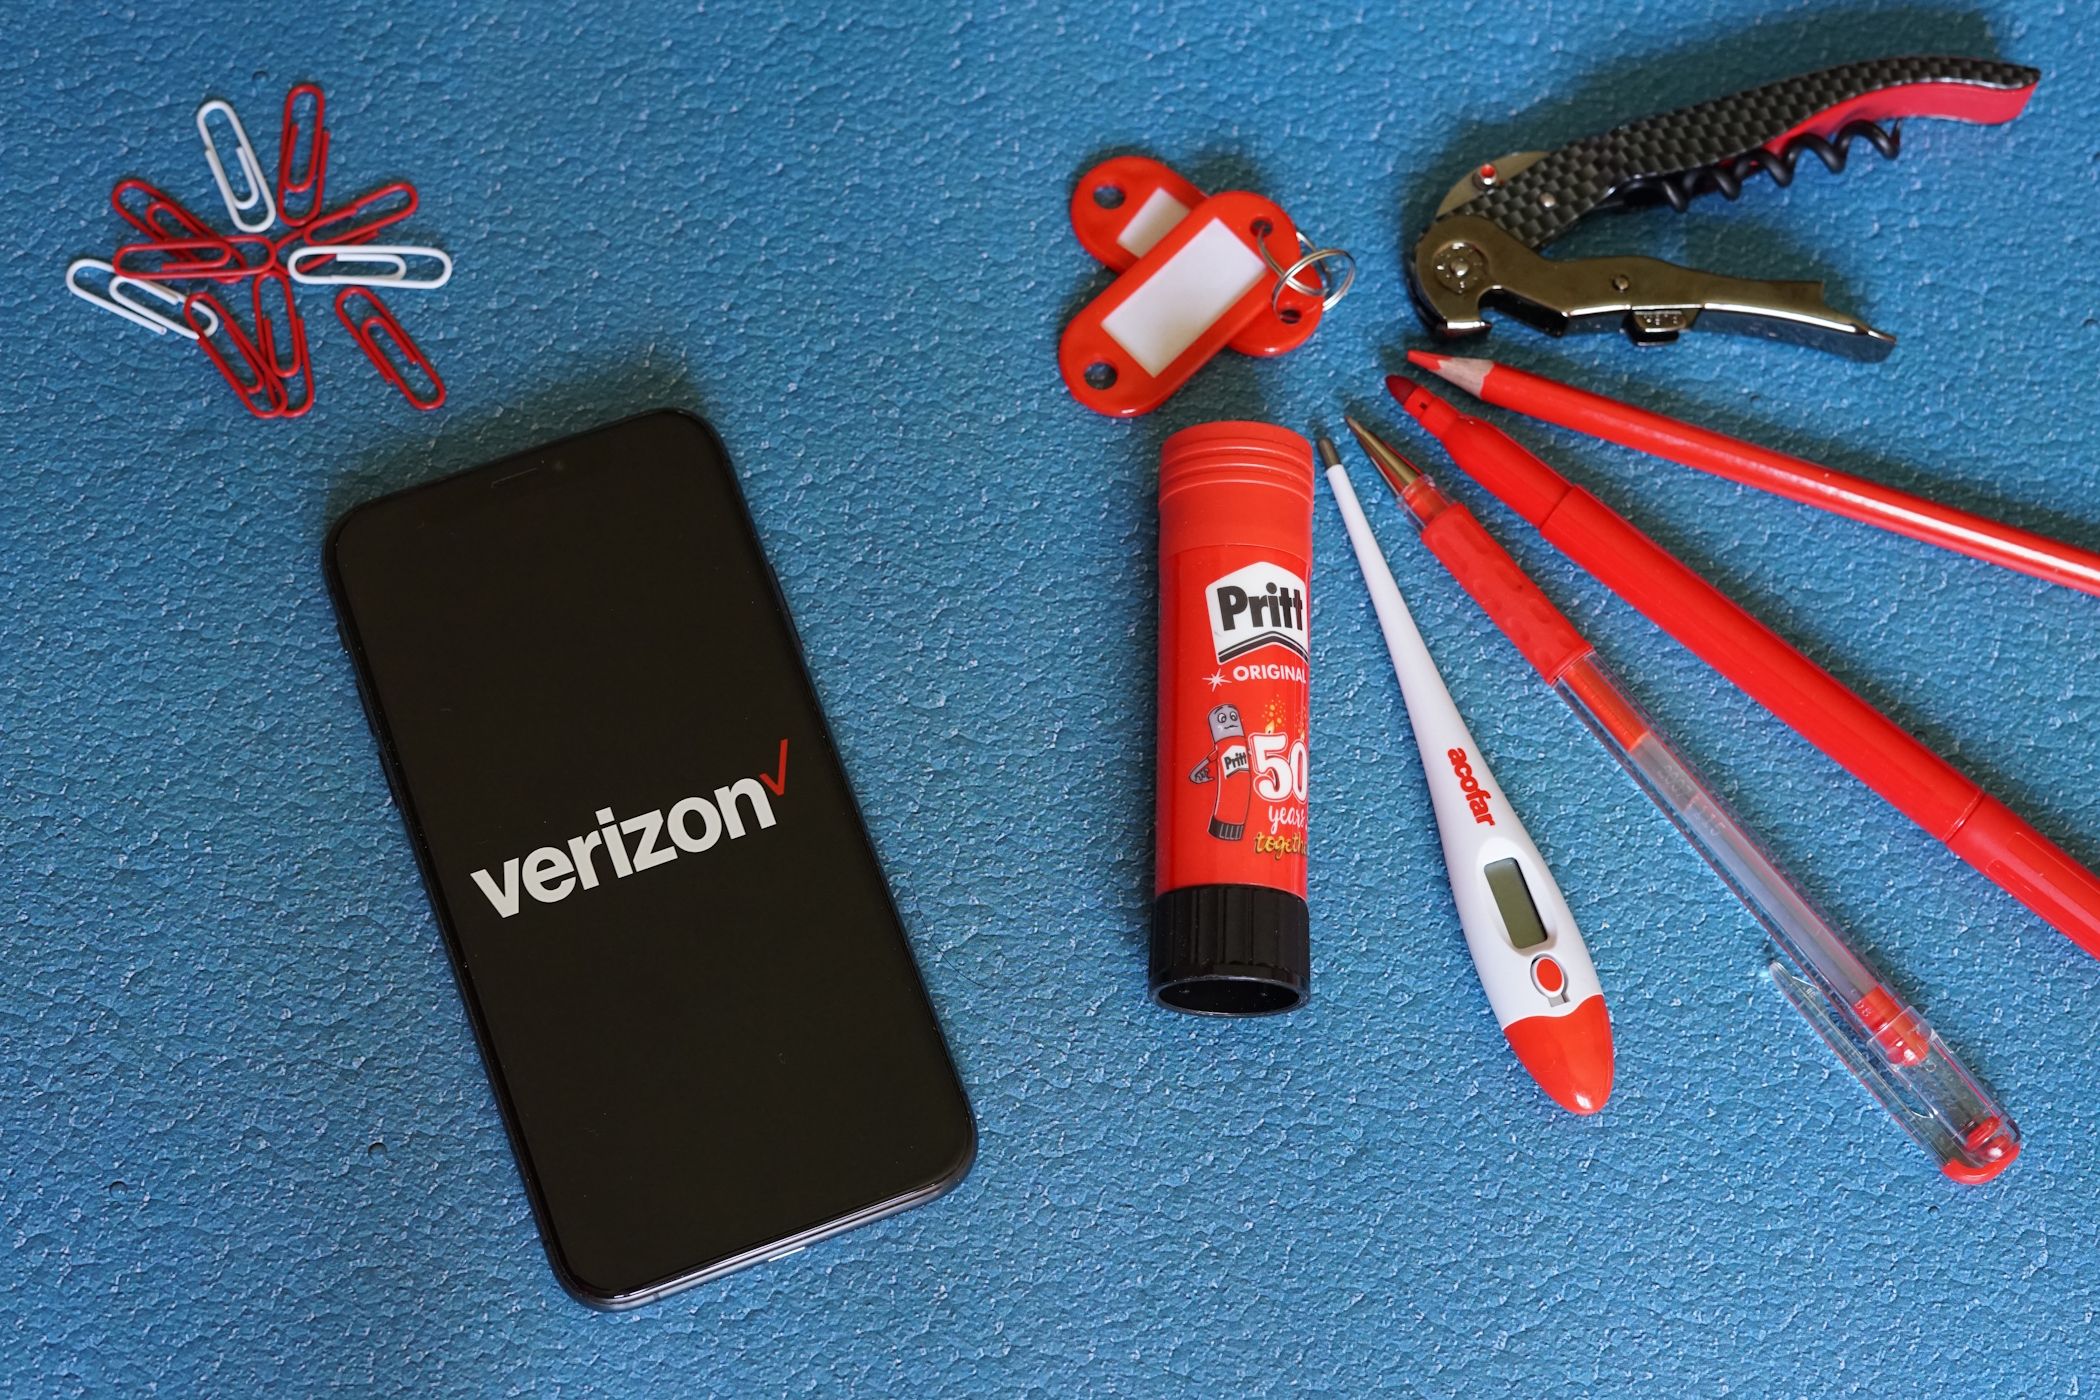 Verizon logo on an iPhone screen next to paper clips and red stationery